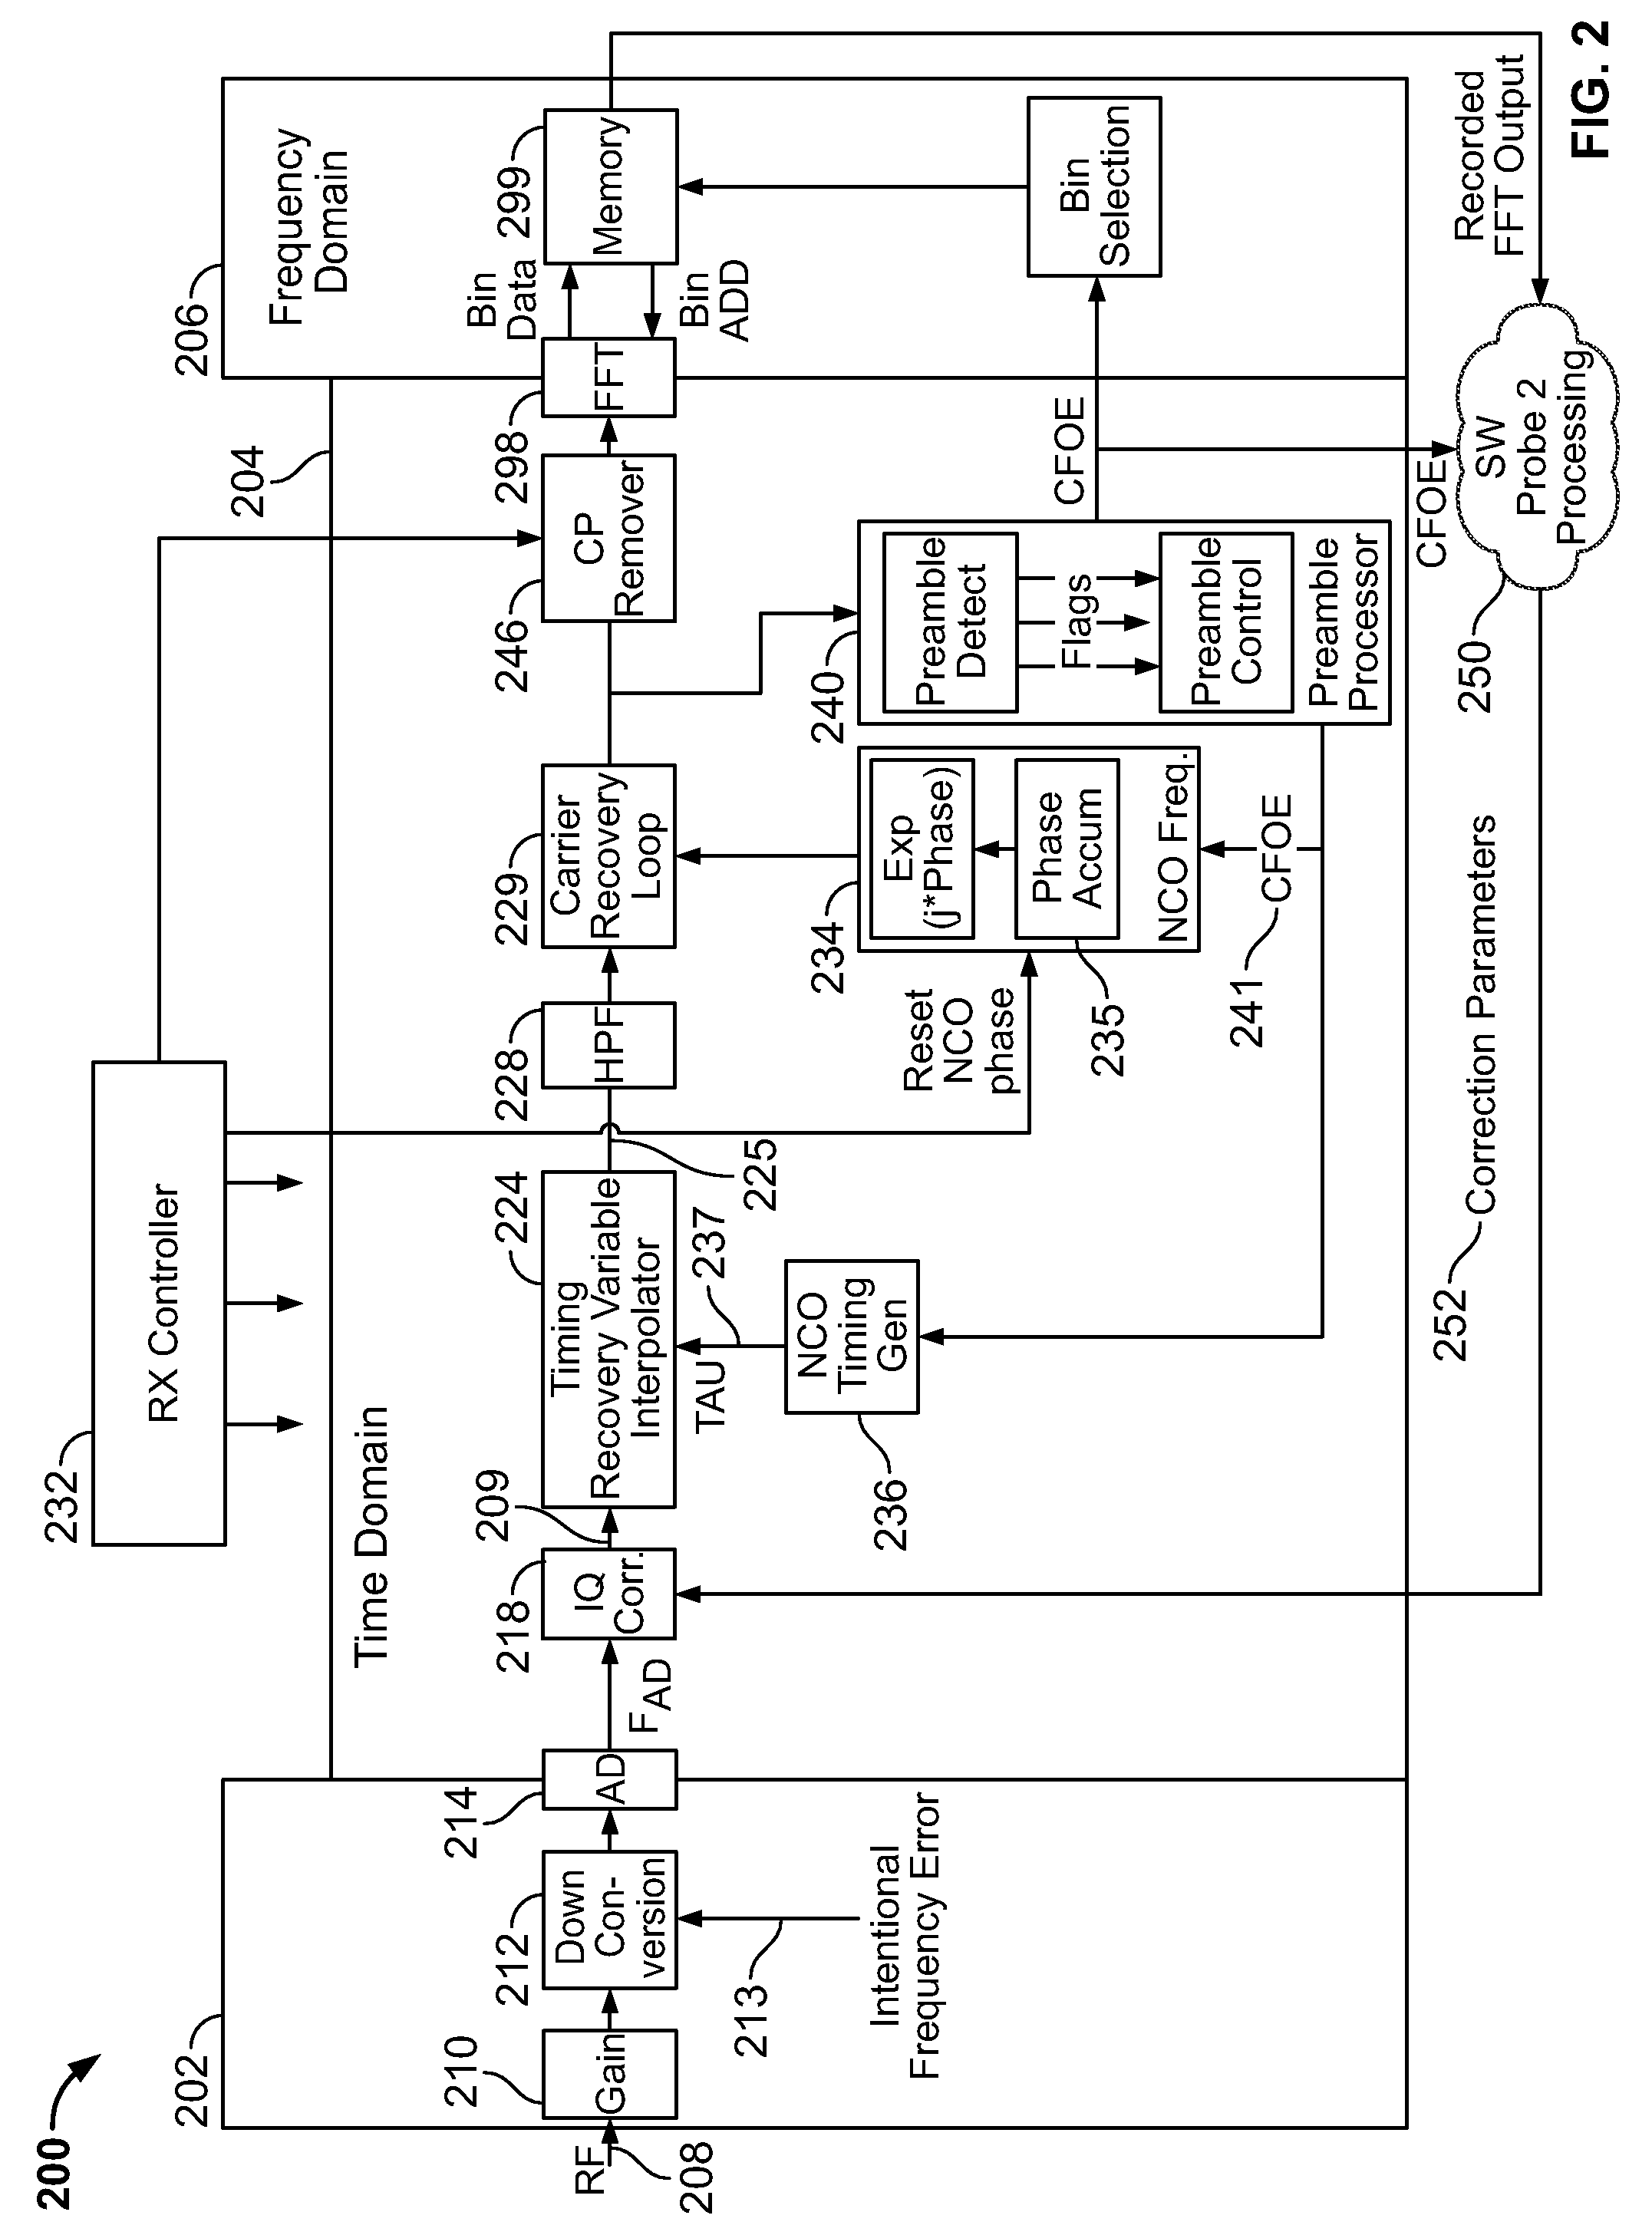 Apparatus and methods for compensating for signal imbalance in a receiver